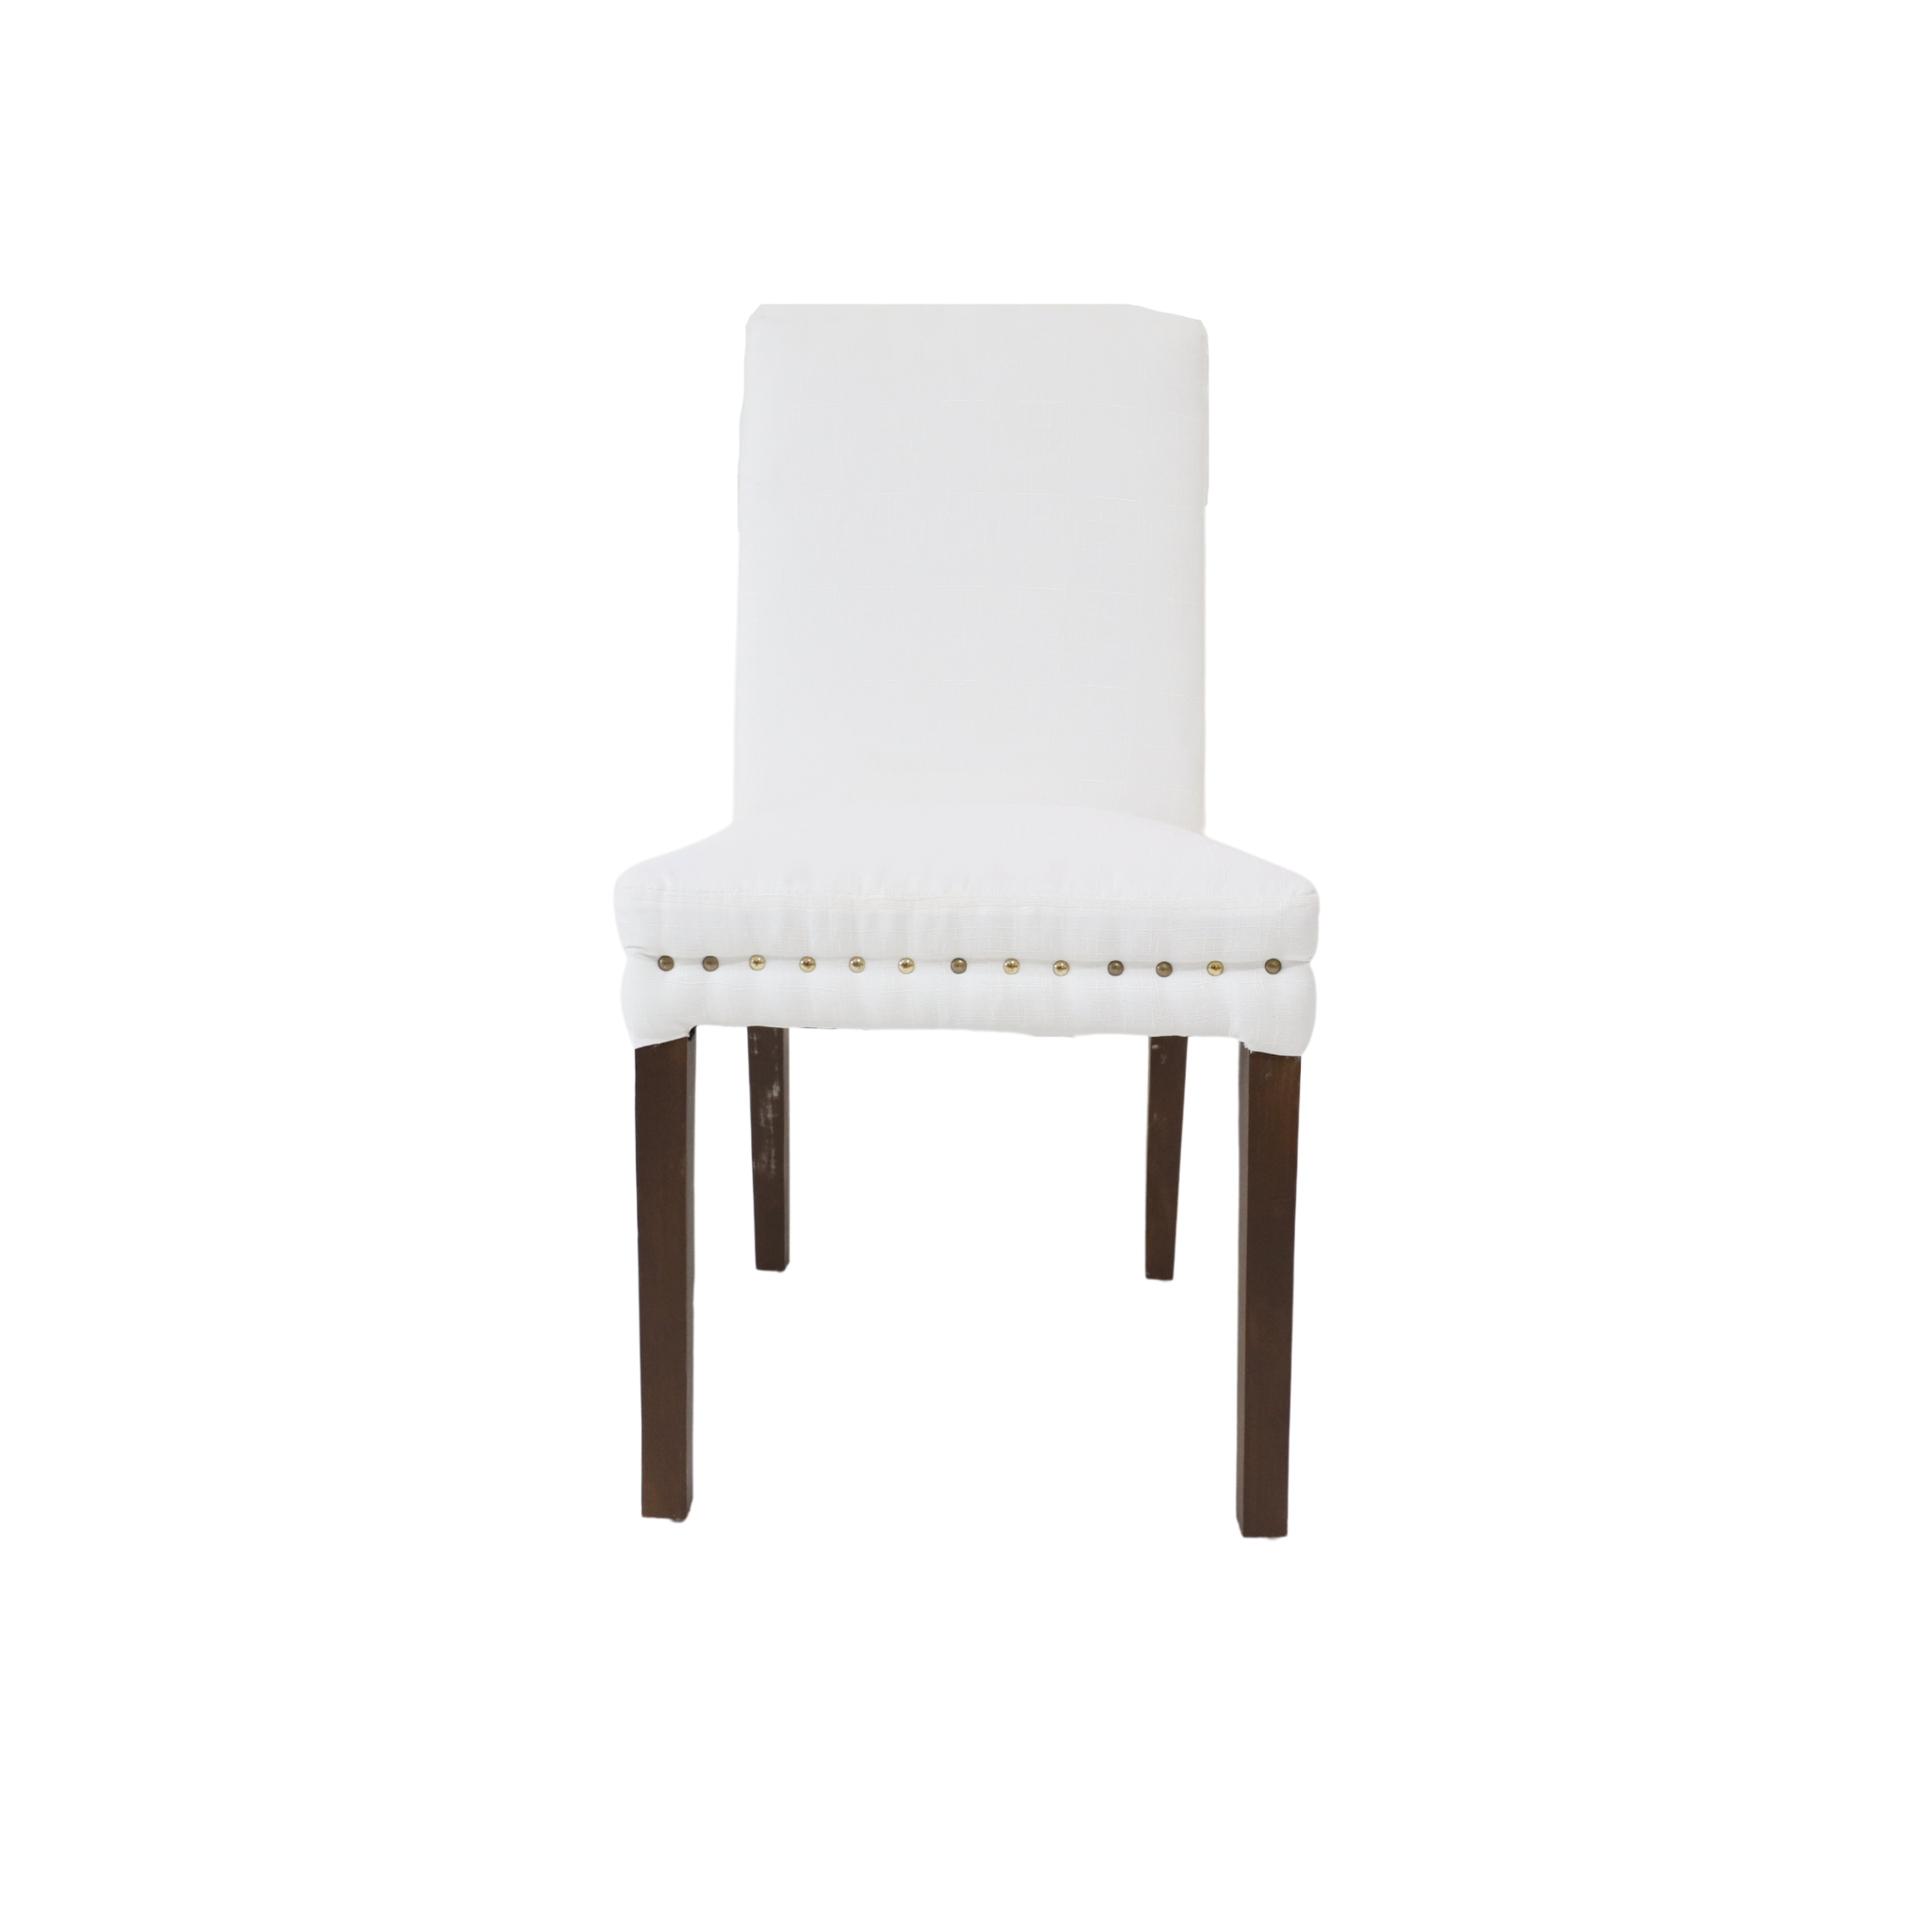 SEARI Wooden Dining Chair AF Home